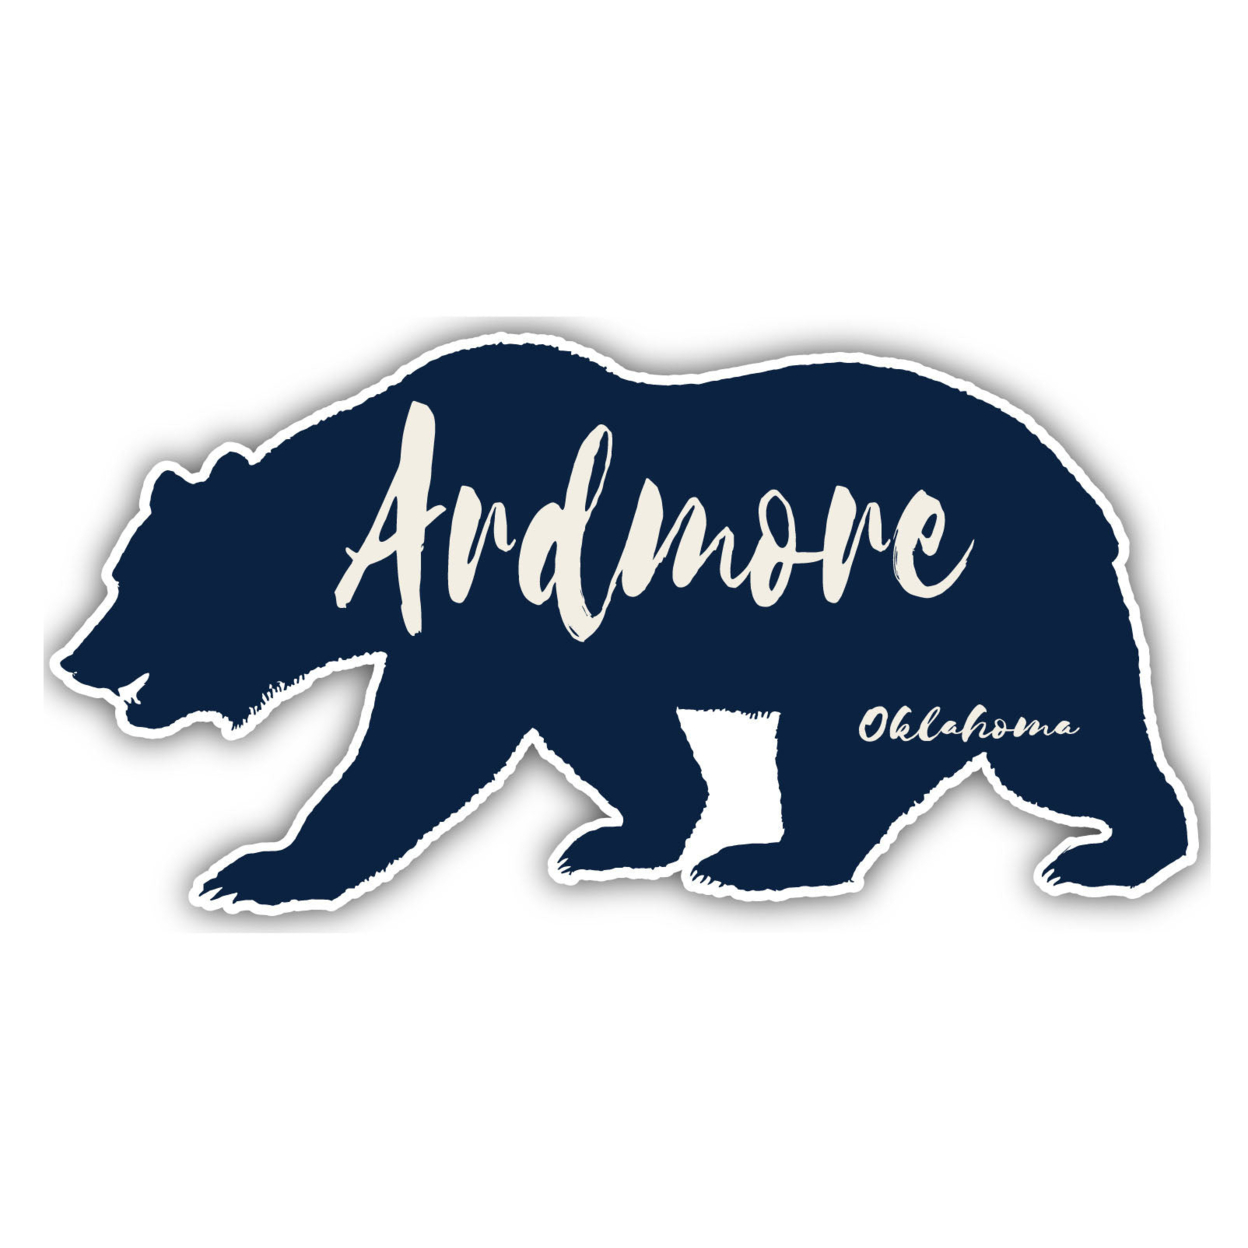 Ardmore Oklahoma Souvenir Decorative Stickers (Choose Theme And Size) - 4-Pack, 6-Inch, Tent